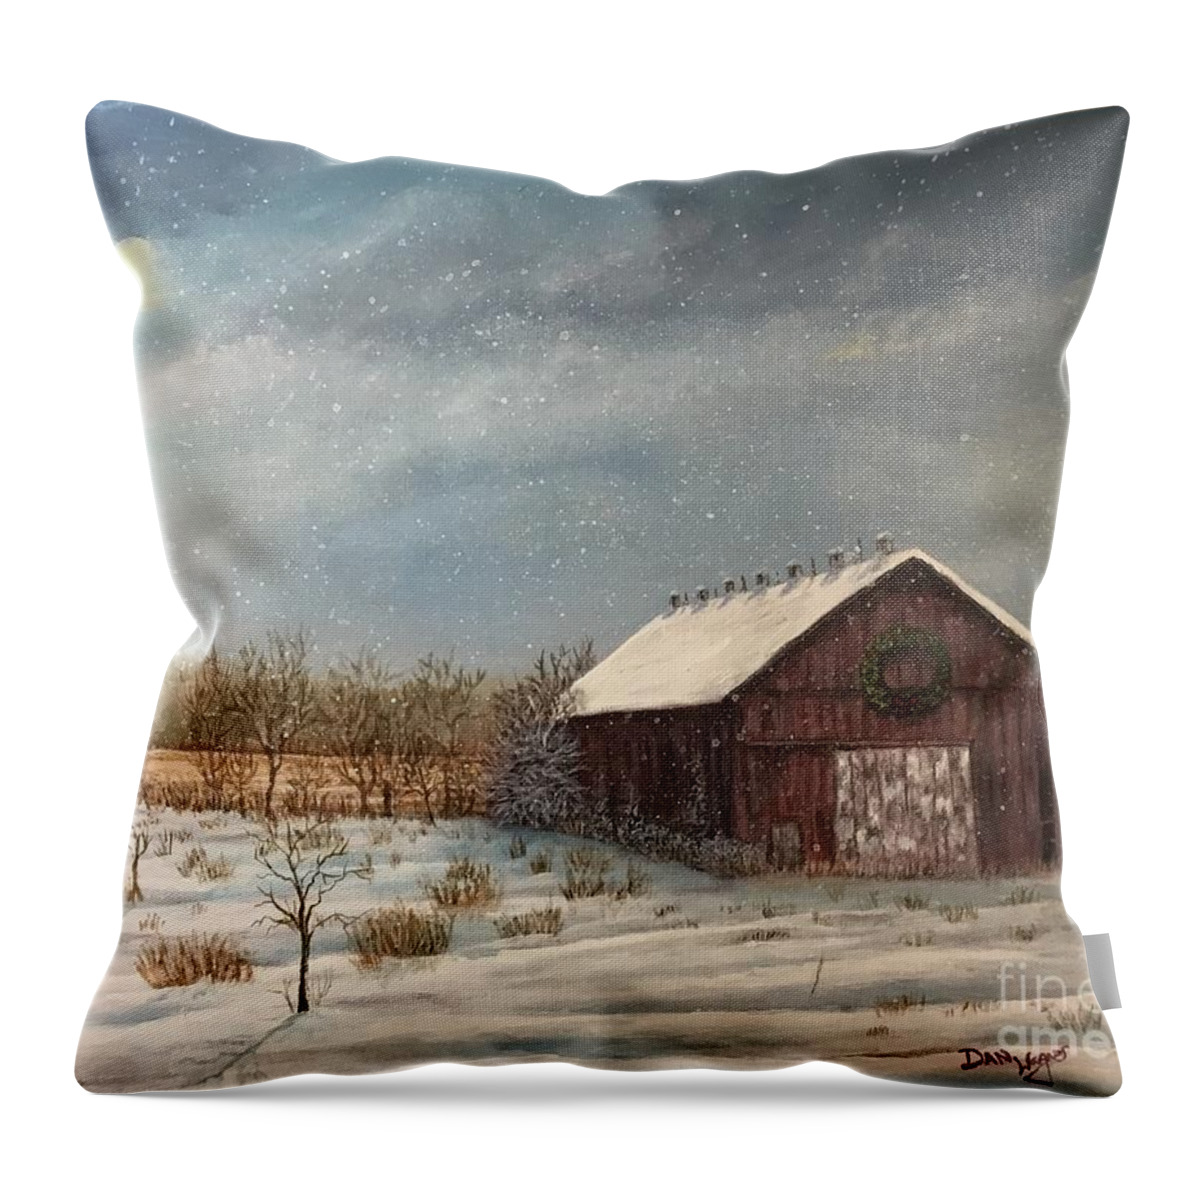 Landscape Throw Pillow featuring the painting Cambridge Christmas by Dan Wagner